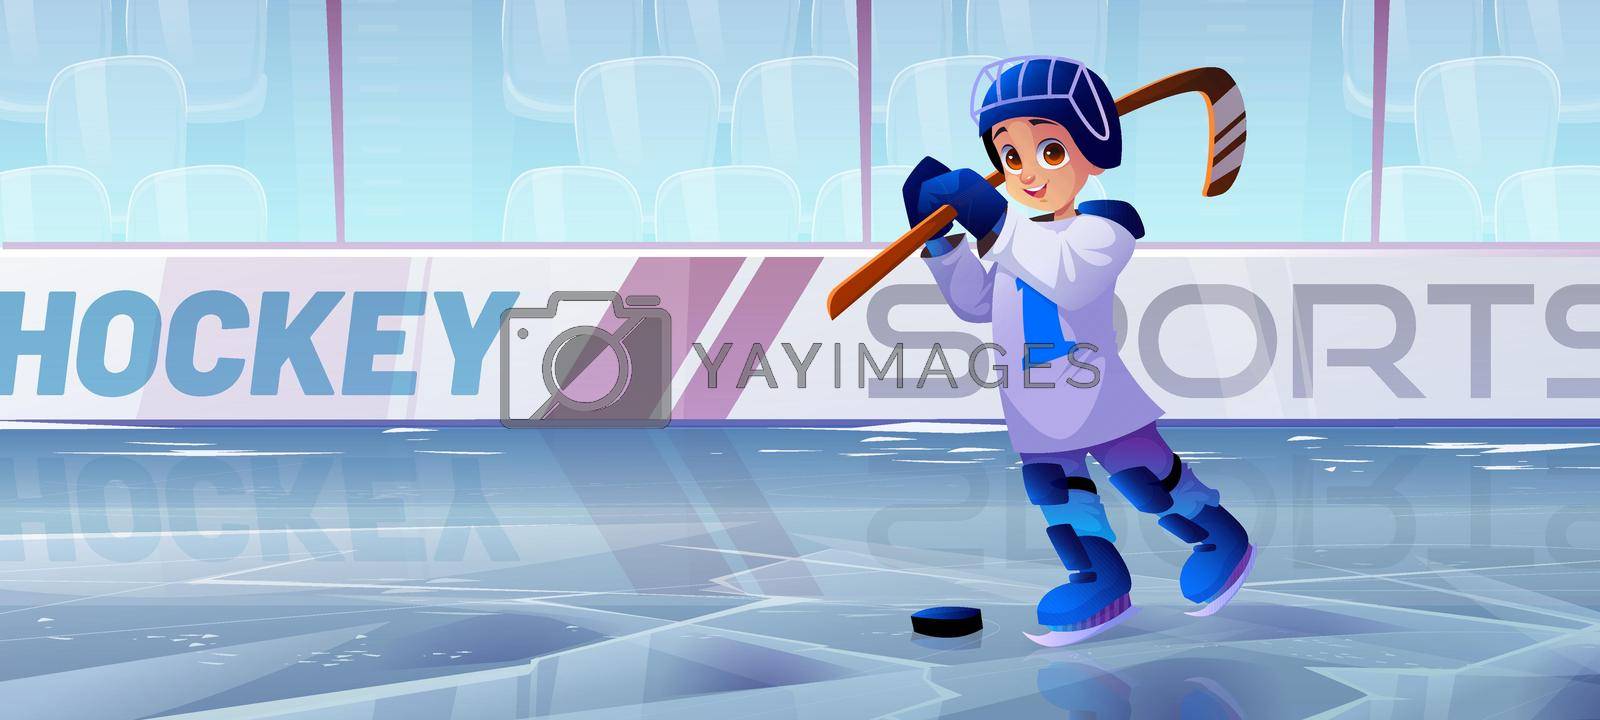 Royalty free image of Hockey ice rink with boy player in skates by vectorart